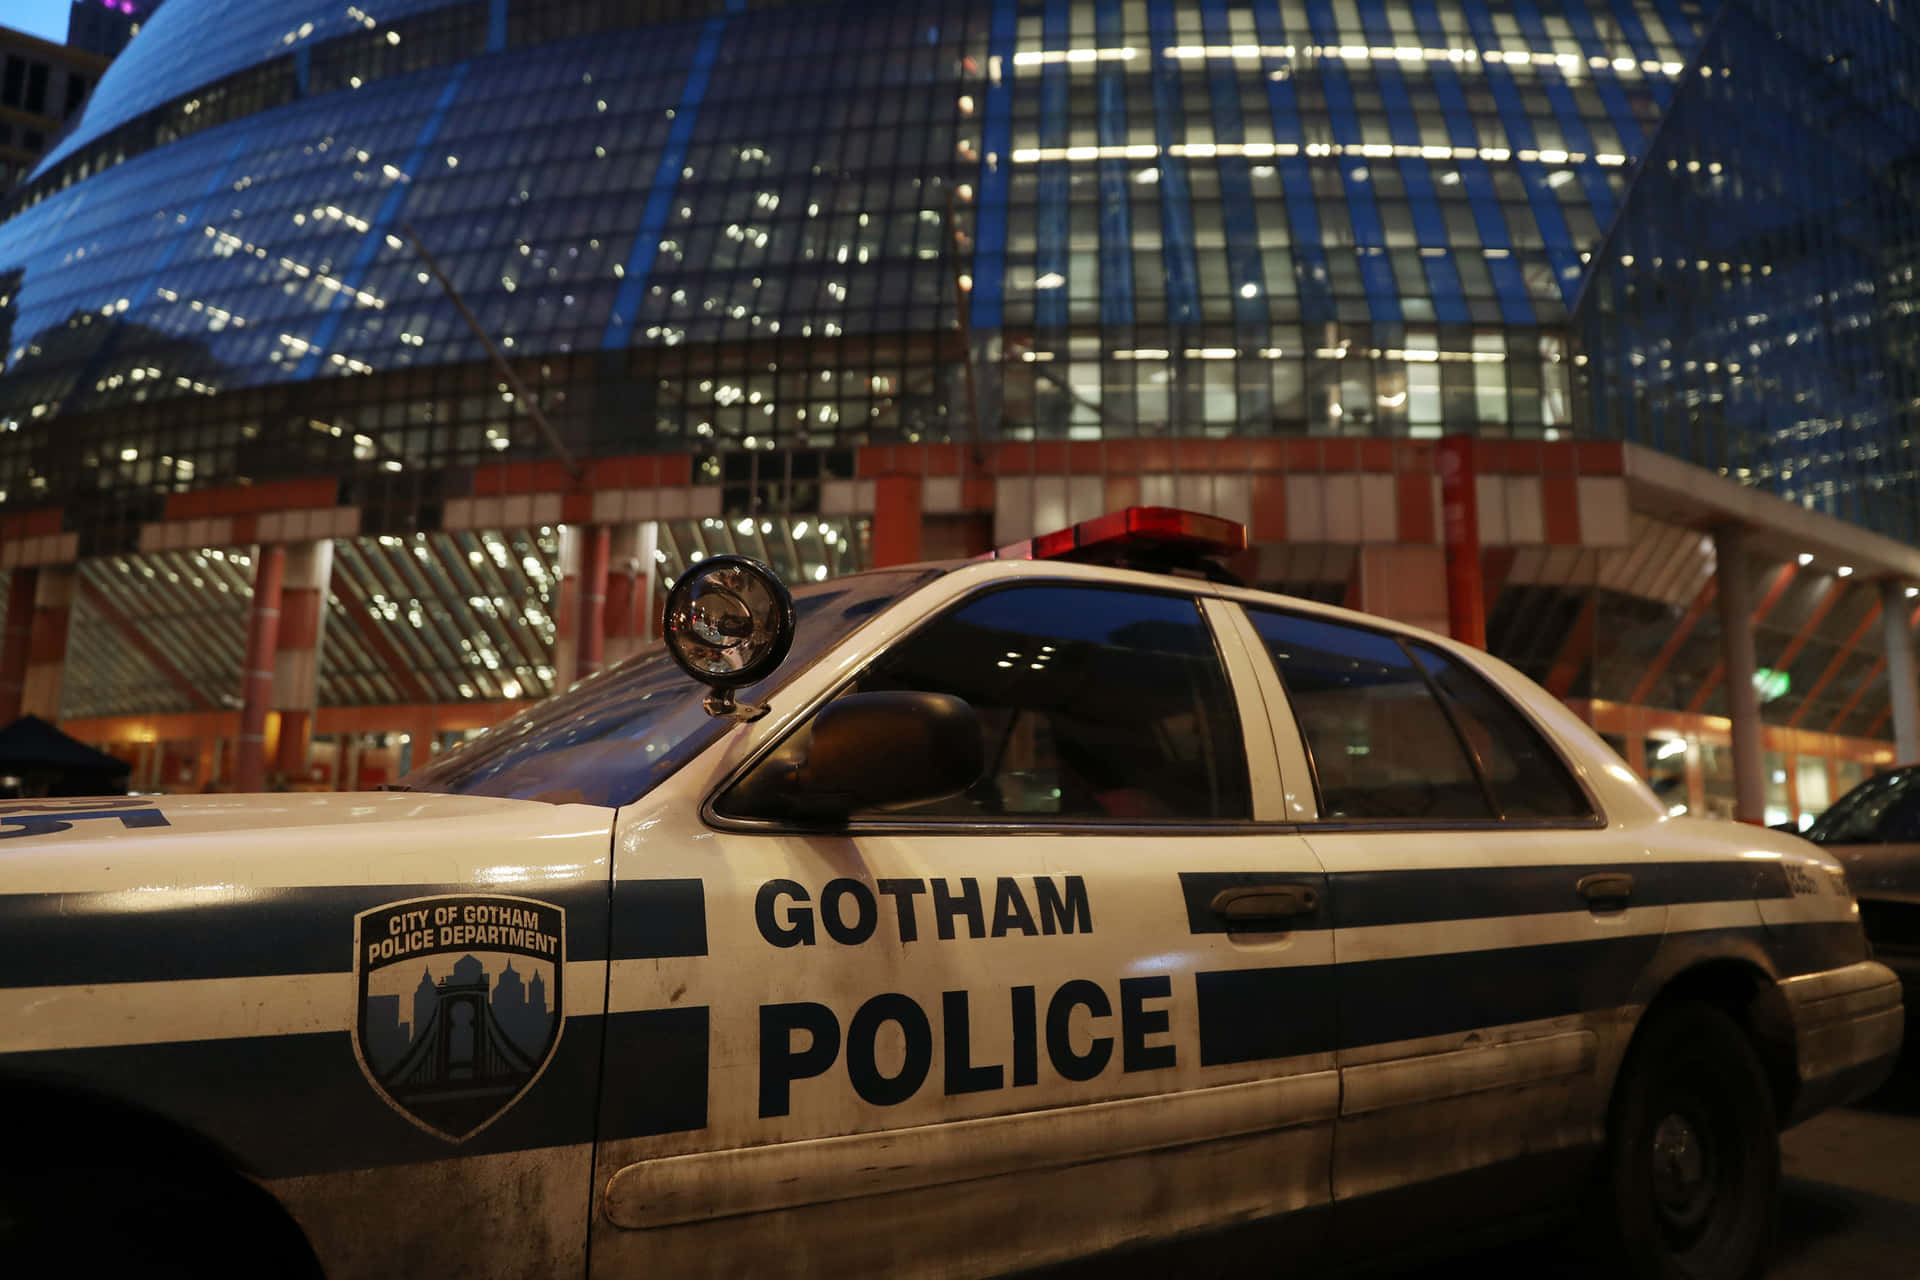 Gotham City Police Department's headquarters at dusk Wallpaper